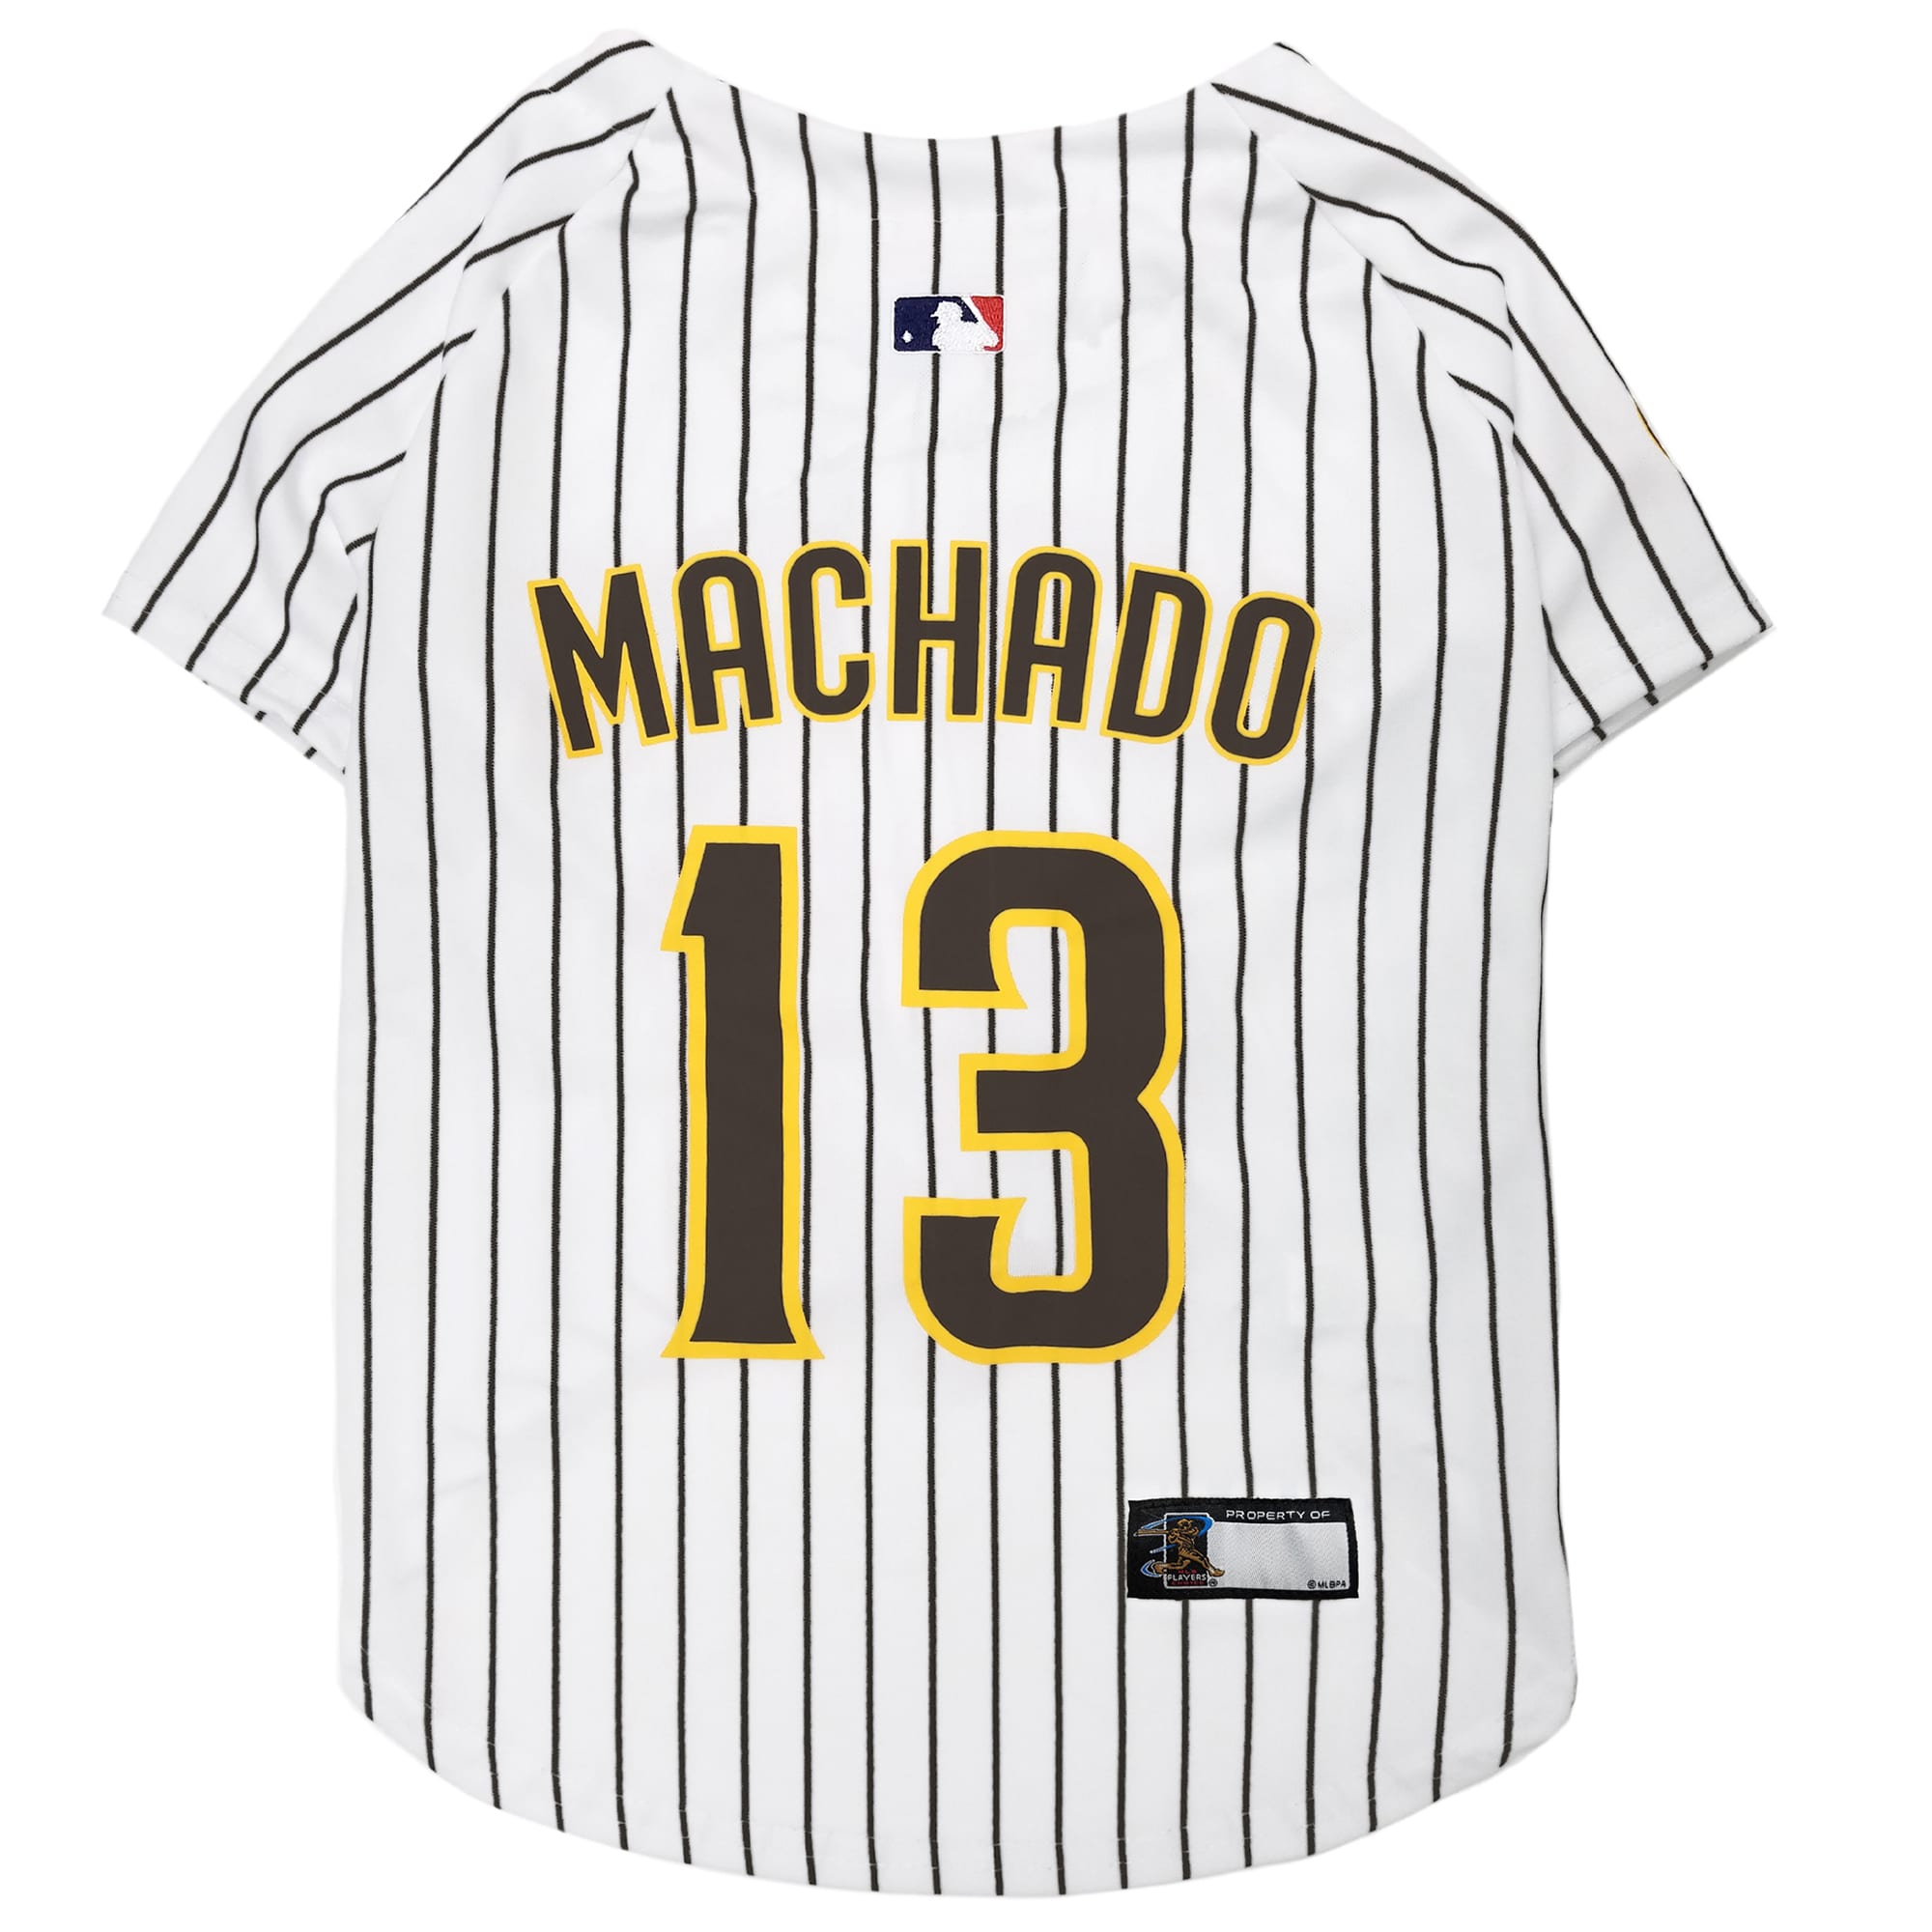 Manny Machado jerseys got pulled from Padres team store